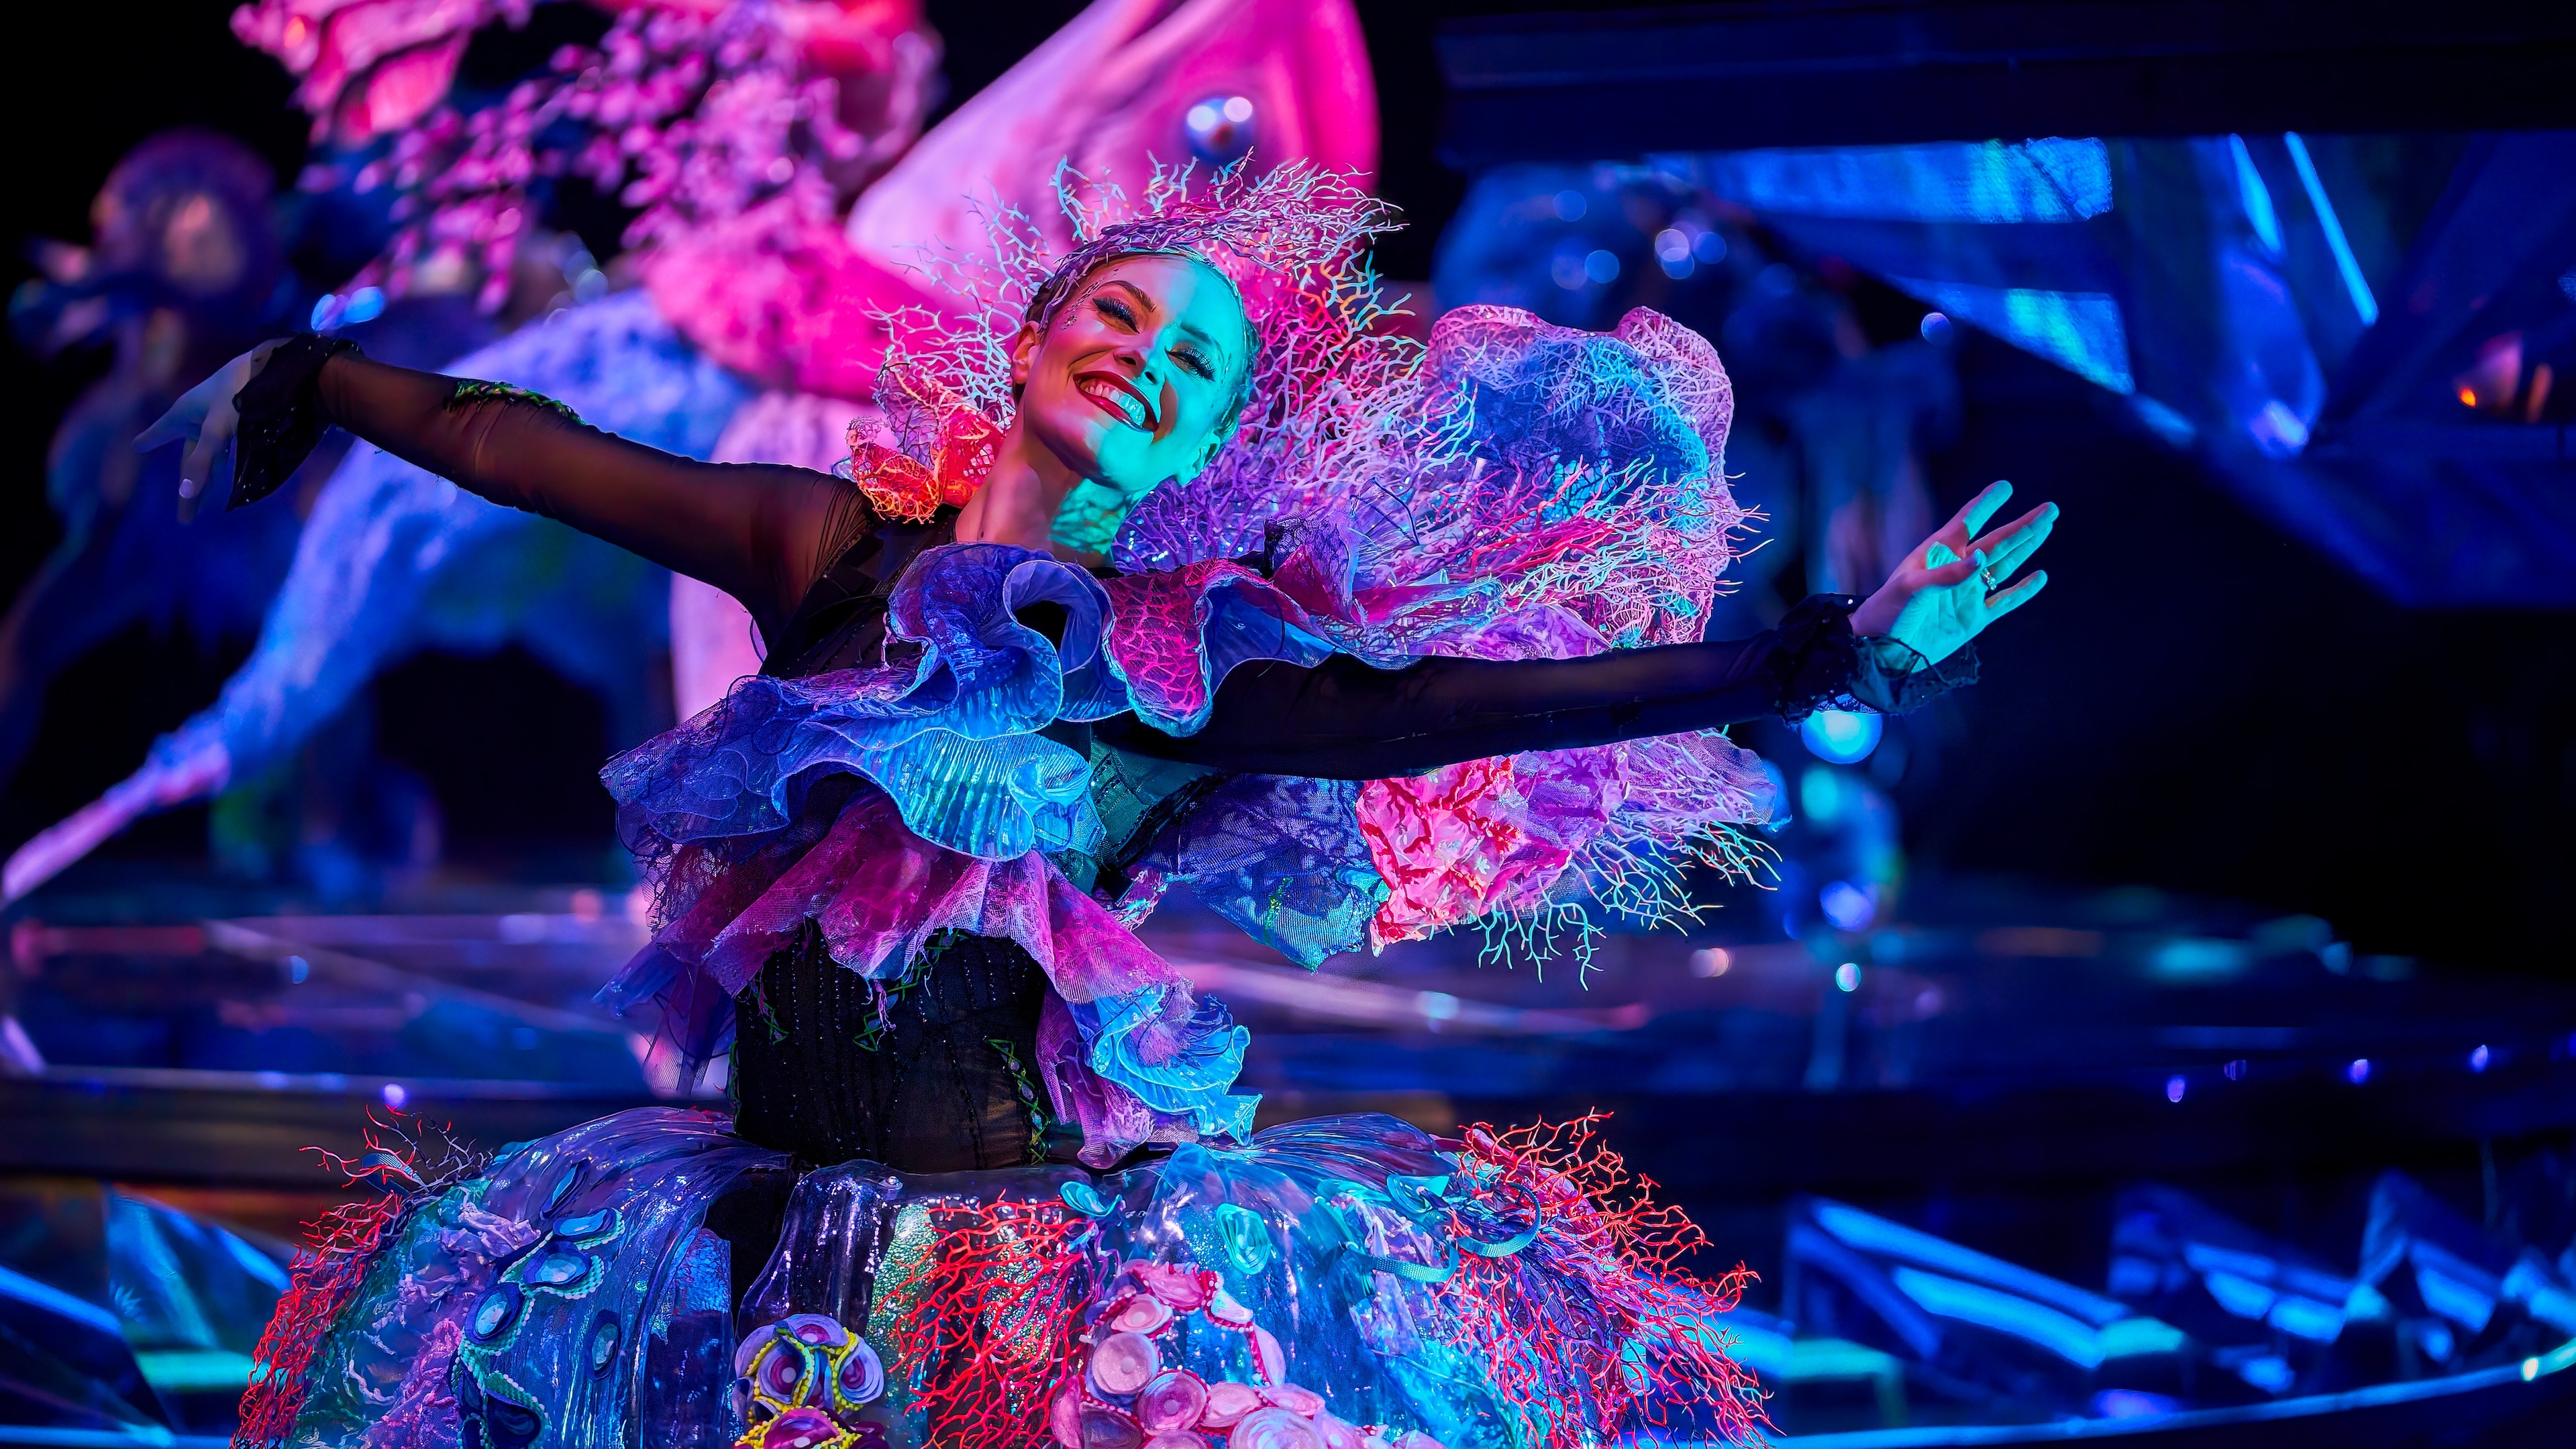 Awakening performer smiling on stage in brightly colored costume